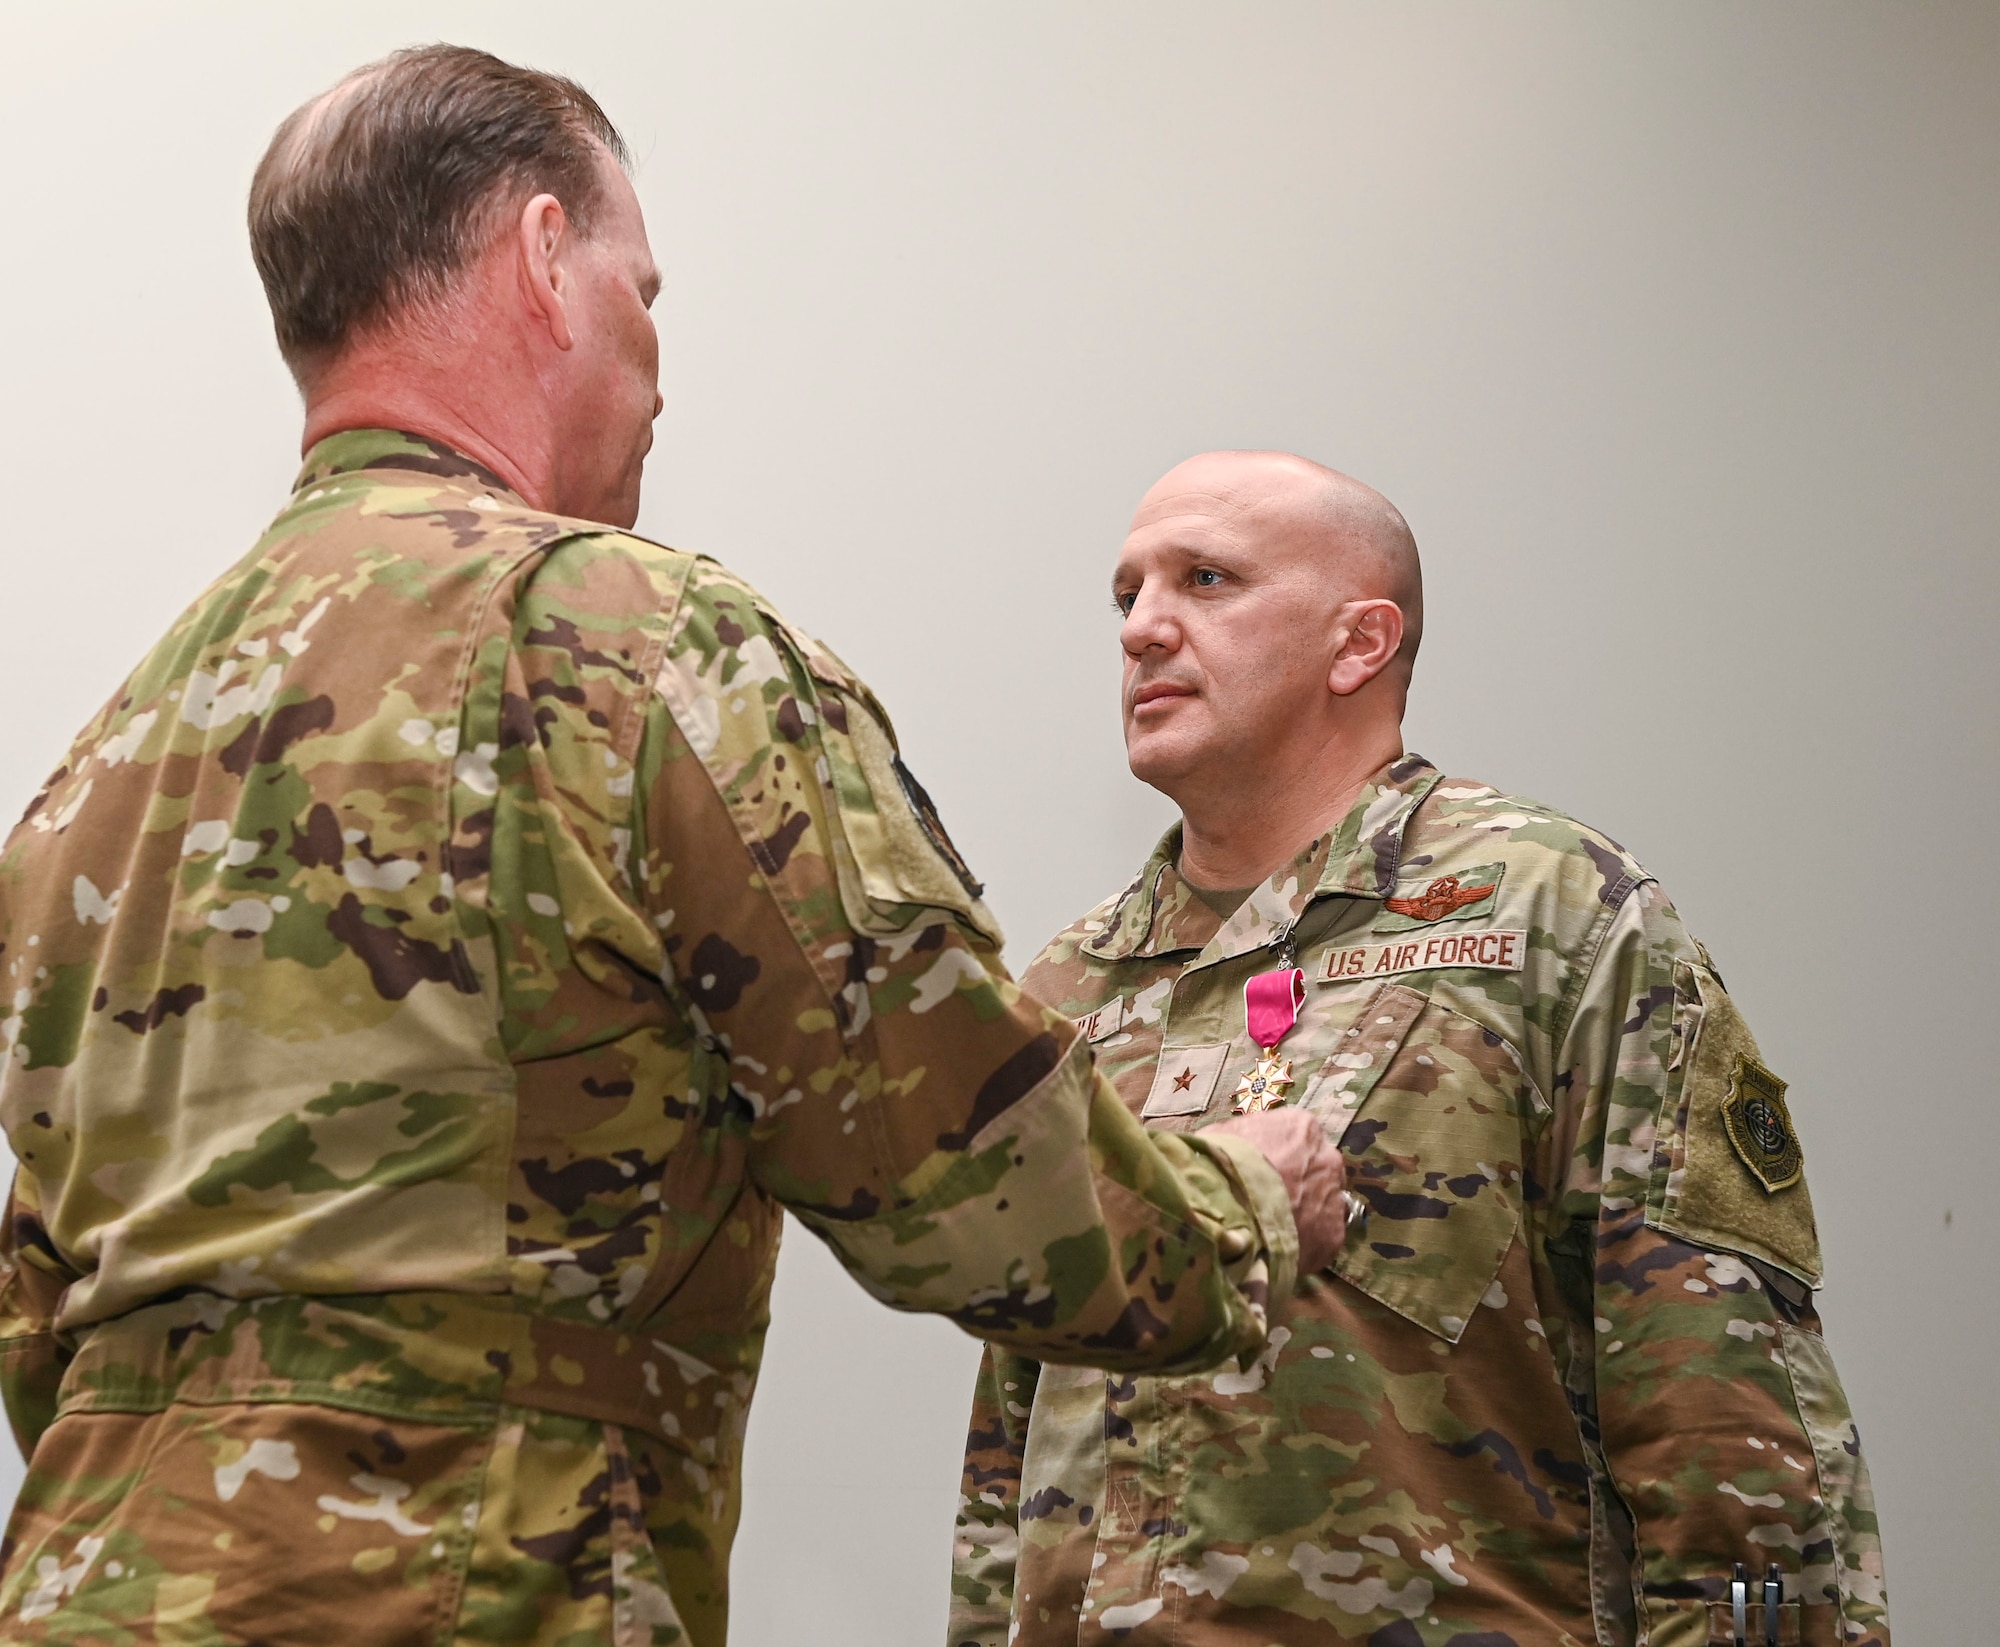 U.S. Air Force Brig. Gen. Gerald Donohue, outgoing 379th Air Expeditionary Wing commander, is awarded the Legion of Merit, Second Oak Leaf Cluster, by U.S. Air Force Maj. Gen. David Meyer, Ninth Air Force deputy commander, during the official wing Change of Command ceremony May 30, 2022, at Al Udeid Air Base, Qatar. Donohue had served as the 379th AEW commander since June 2021. (U.S. Air National Guard photo by Tech. Sgt. Michael J. Kelly)